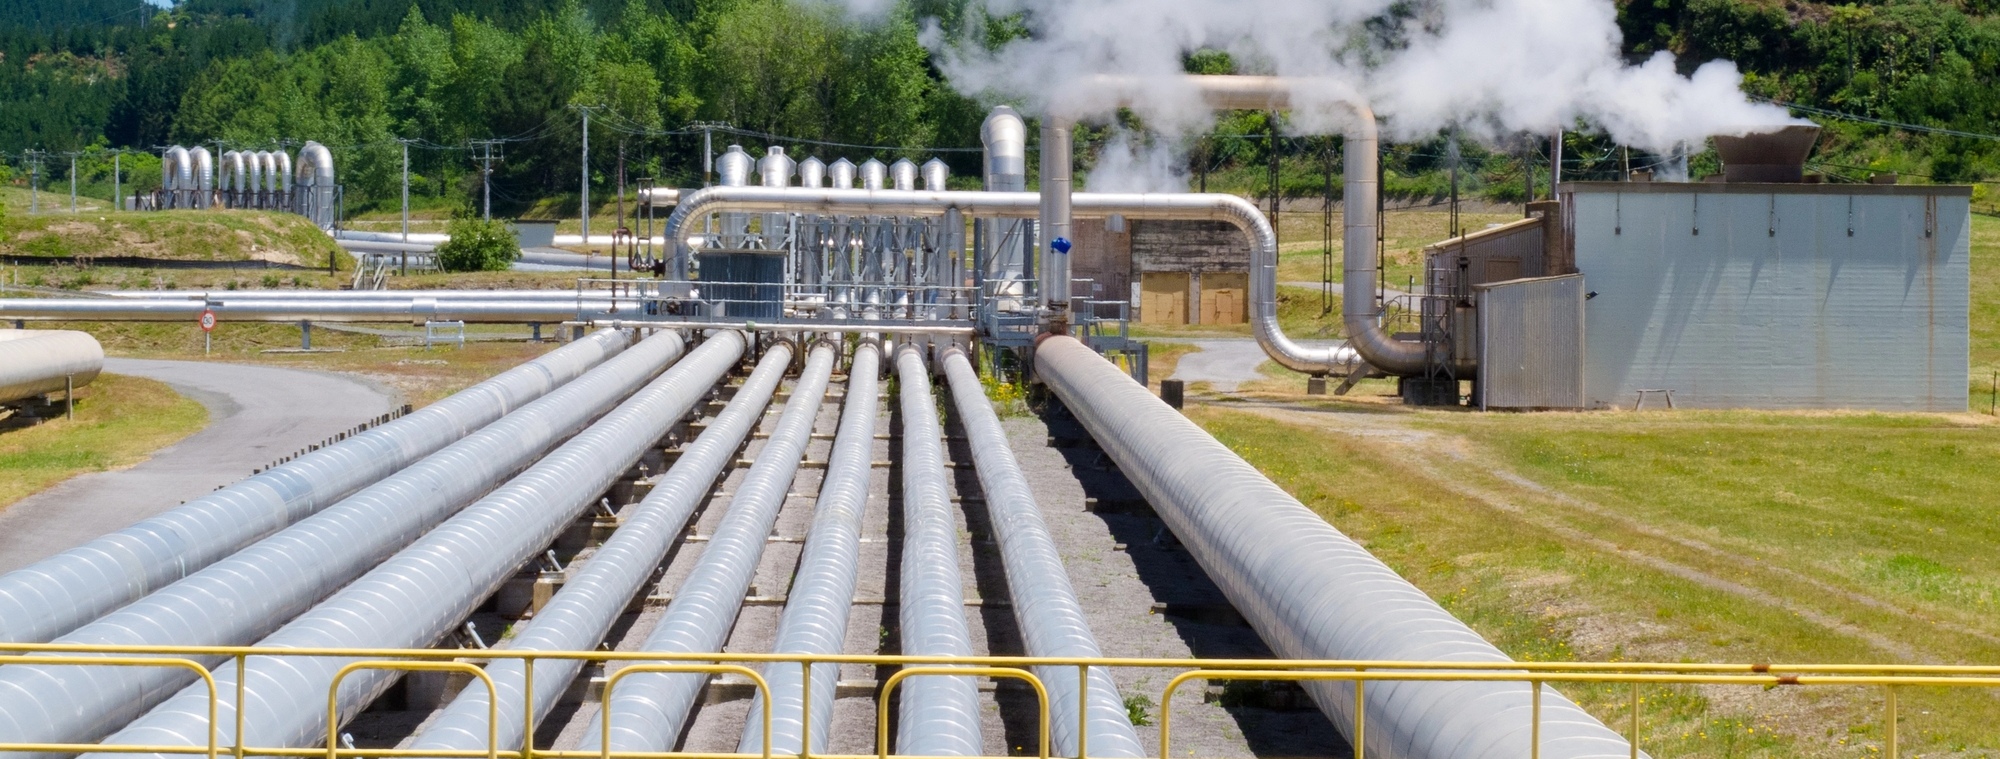 Geothermal Energy in Greece: An Unexplored Reservoir of Clean Energy